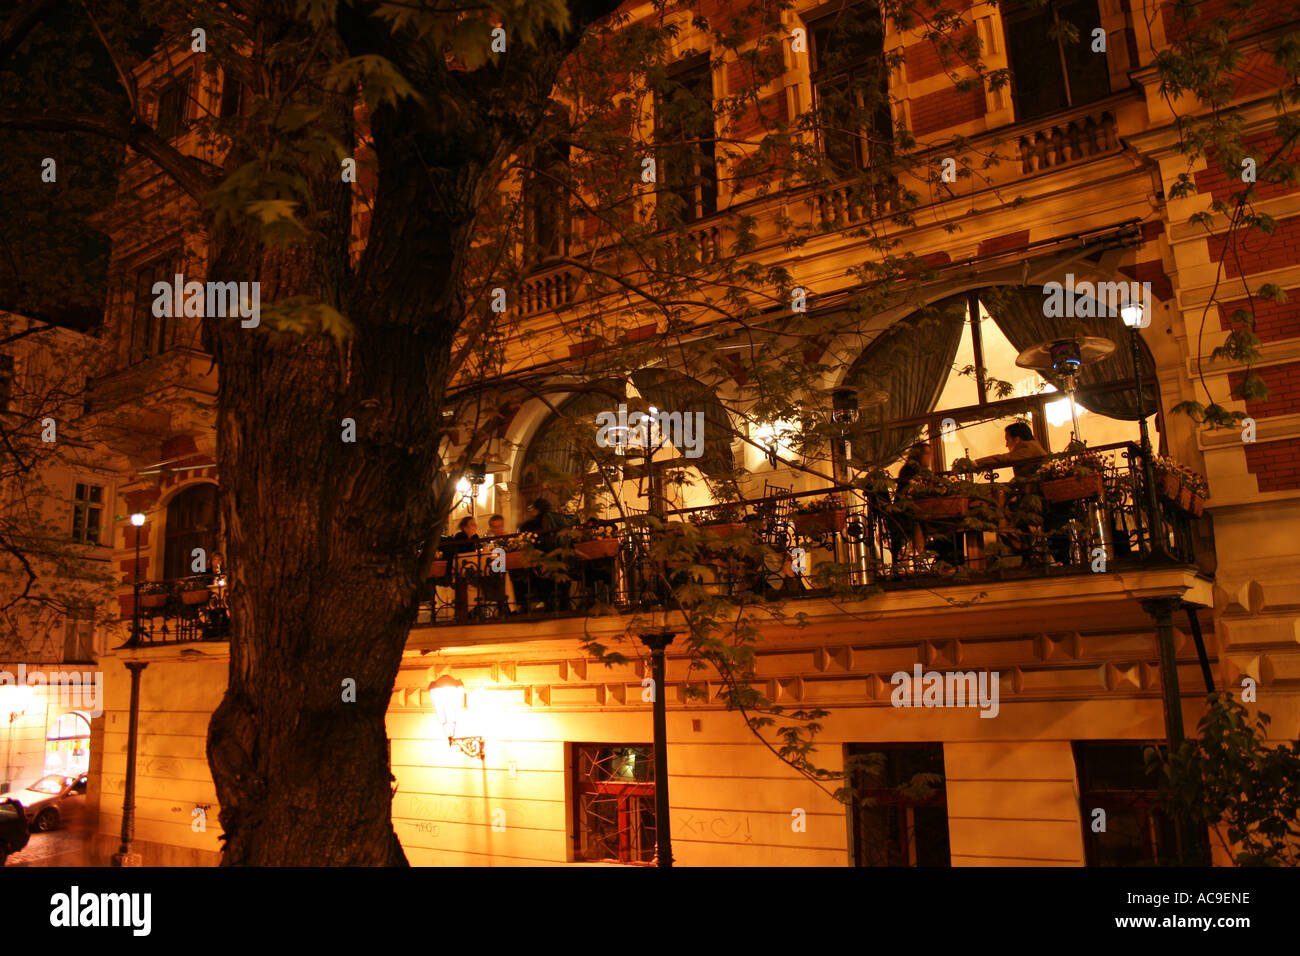 Outdoor restaurant on a charming balcony of a historic building in Prague, illuminated at night, with people dining and enjoying the ambiance. Stock Photo